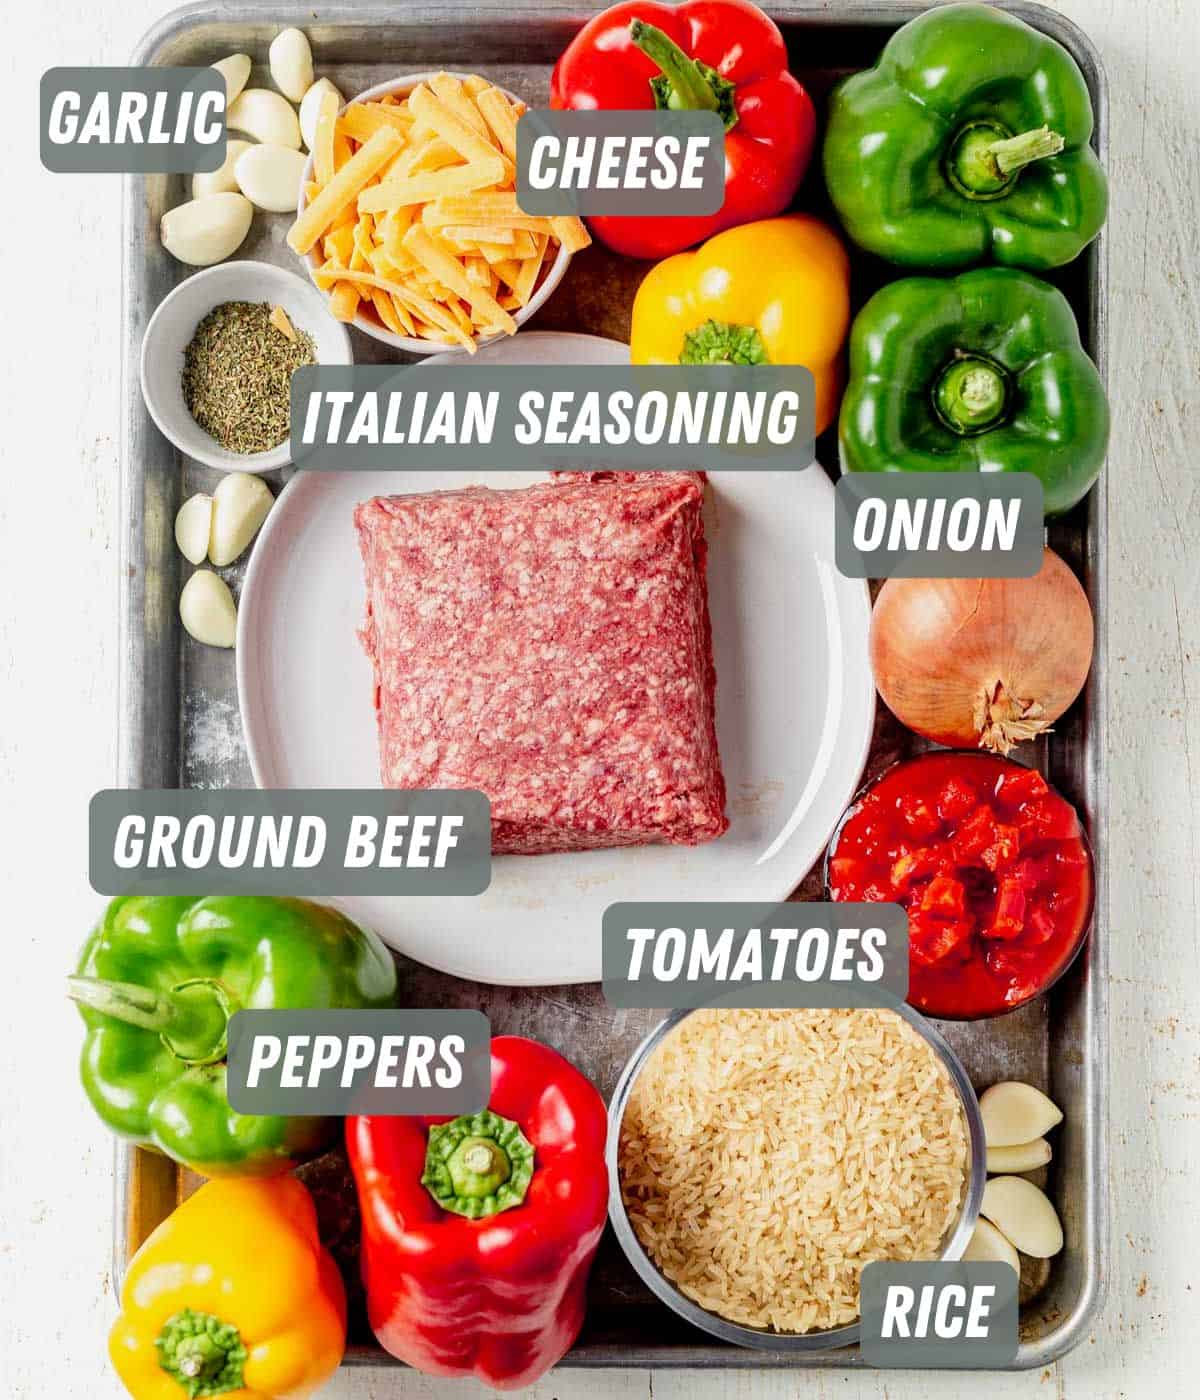 ground beef, bell peppers, uncooked rice, garlic, onion and cheese on a tray